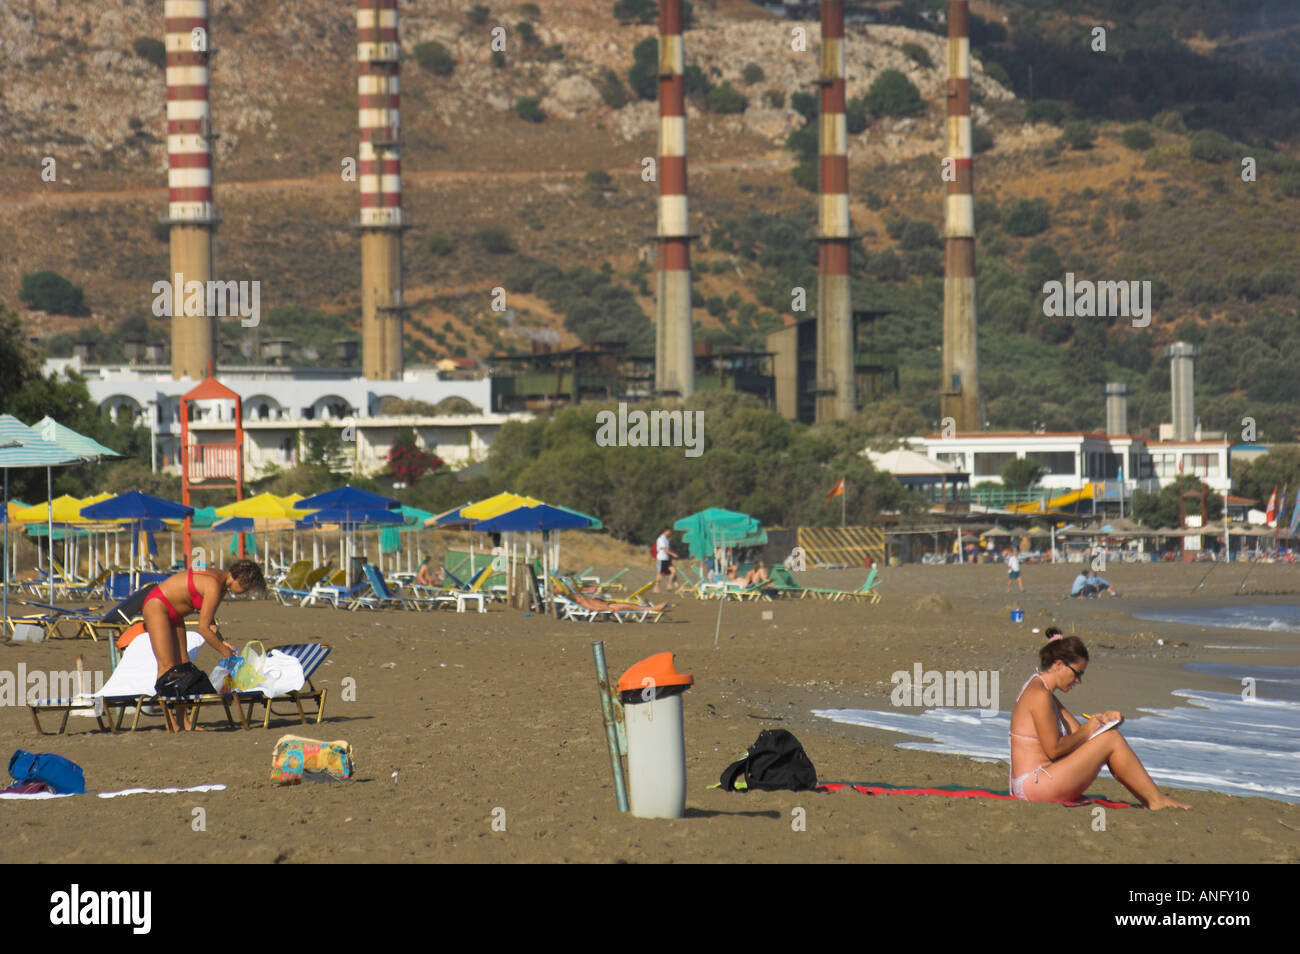 Greece Crete Ammoudara woman on the beach with umbrelas and power plant chimneys in the bkgd Stock Photo